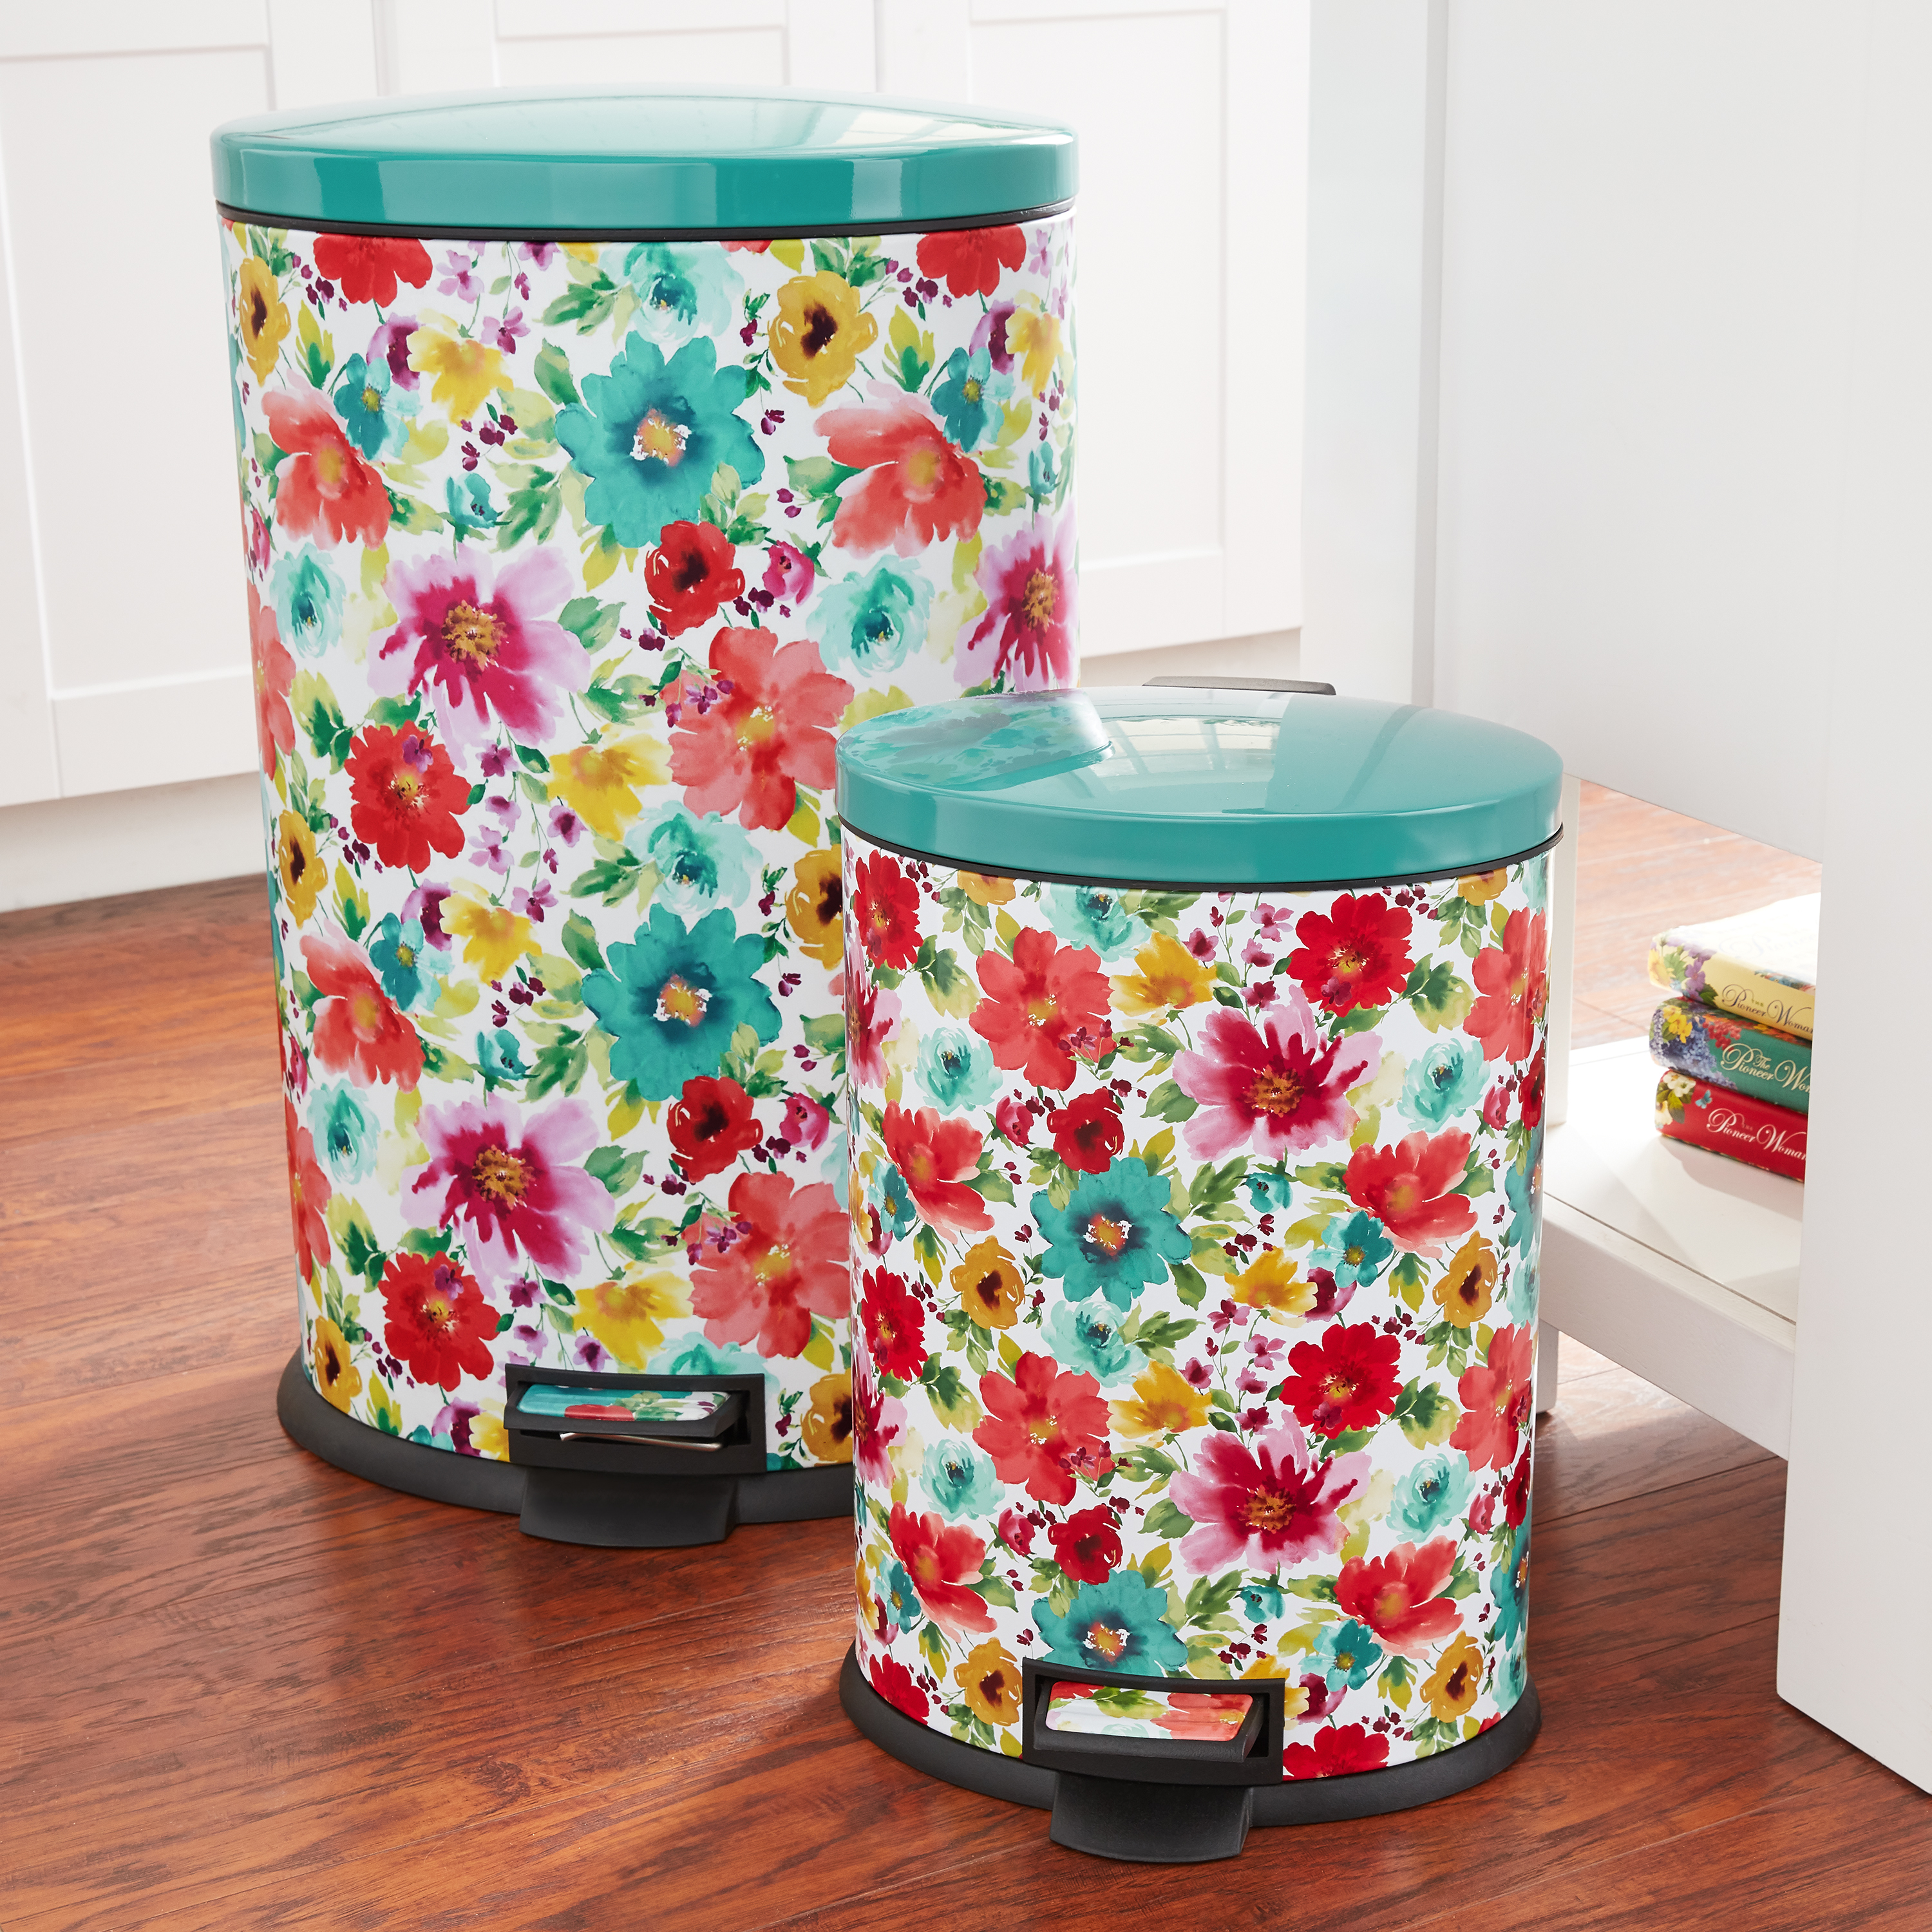 Pioneer Woman Stainless Steel 10.5 gal and 3.1 gal Kitchen Garbage Can Combo, Breezy Blossom - image 5 of 5